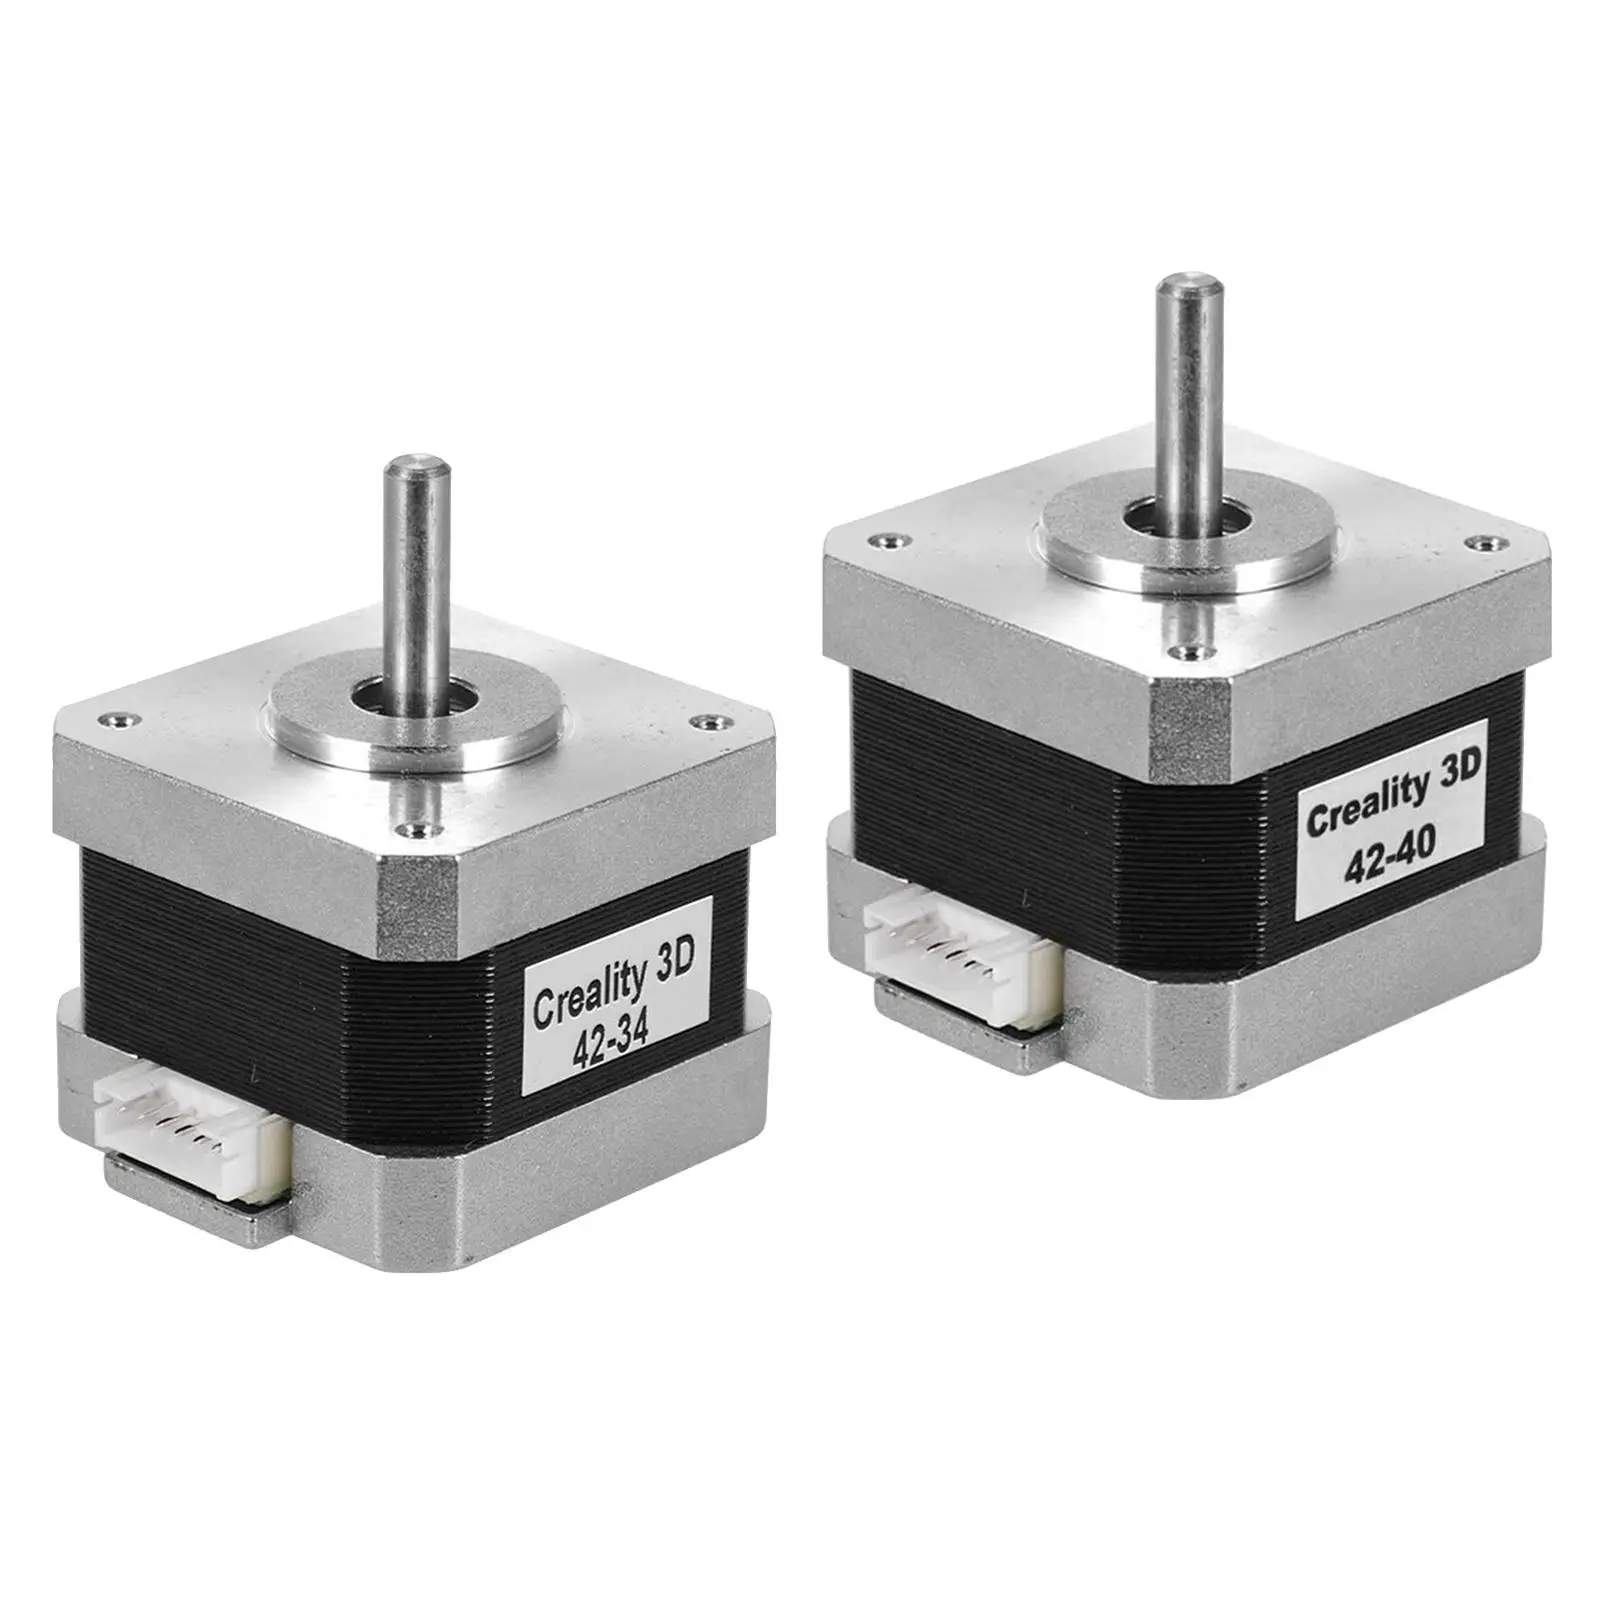 Stepping Stepper Motor for 3d Printer, Machinery Equipment,Drive Control 2 Phase CNC Accessory